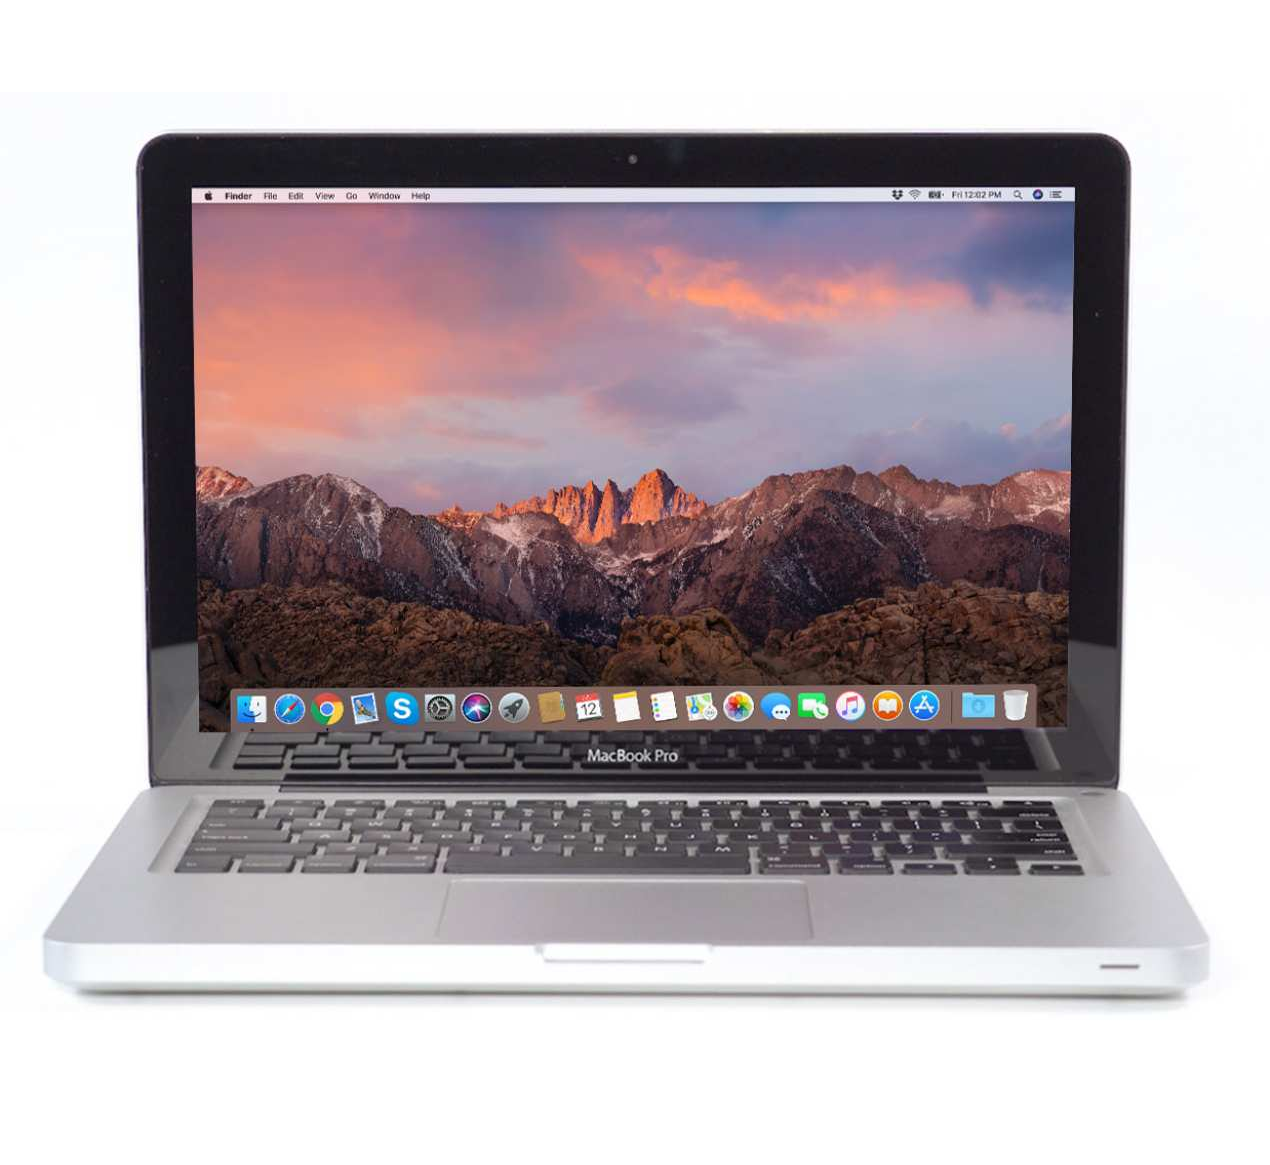 Refurbished & Used MacBook Pro 2012 for Sale | 15 inch & 13 inch 